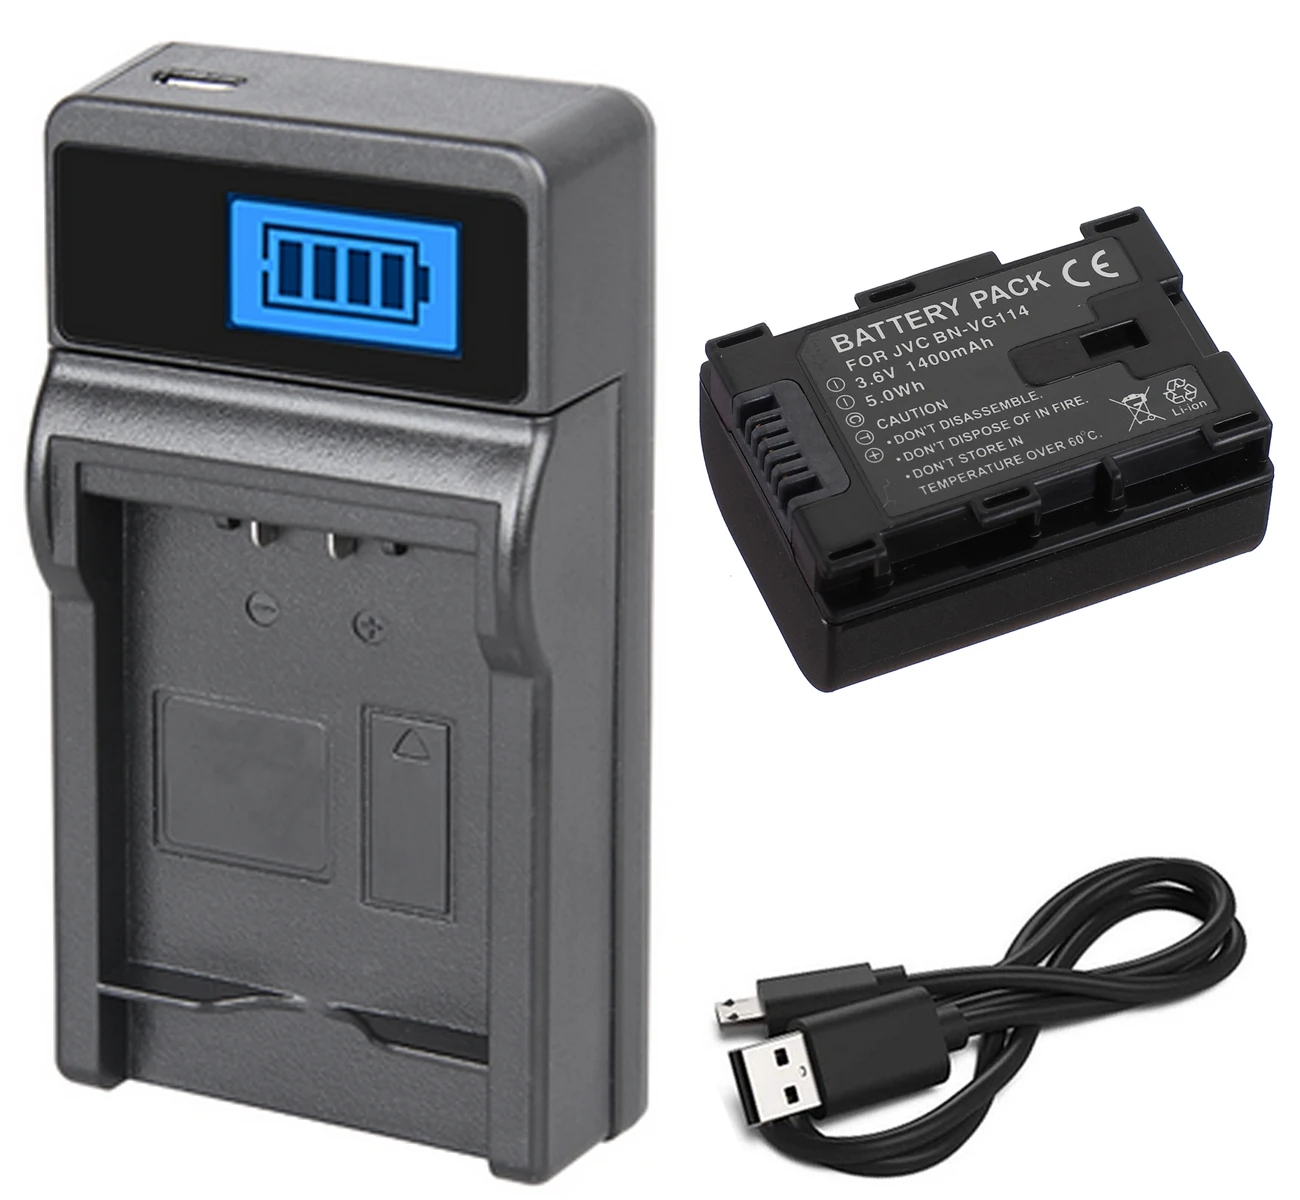 

Battery Pack + LCD USB Charger for JVC BN-VG107, BN-VG107U, BN-VG107E, BN-VG108, BN-VG108U, BN-VG108E, BN-VG114, BN-VG121